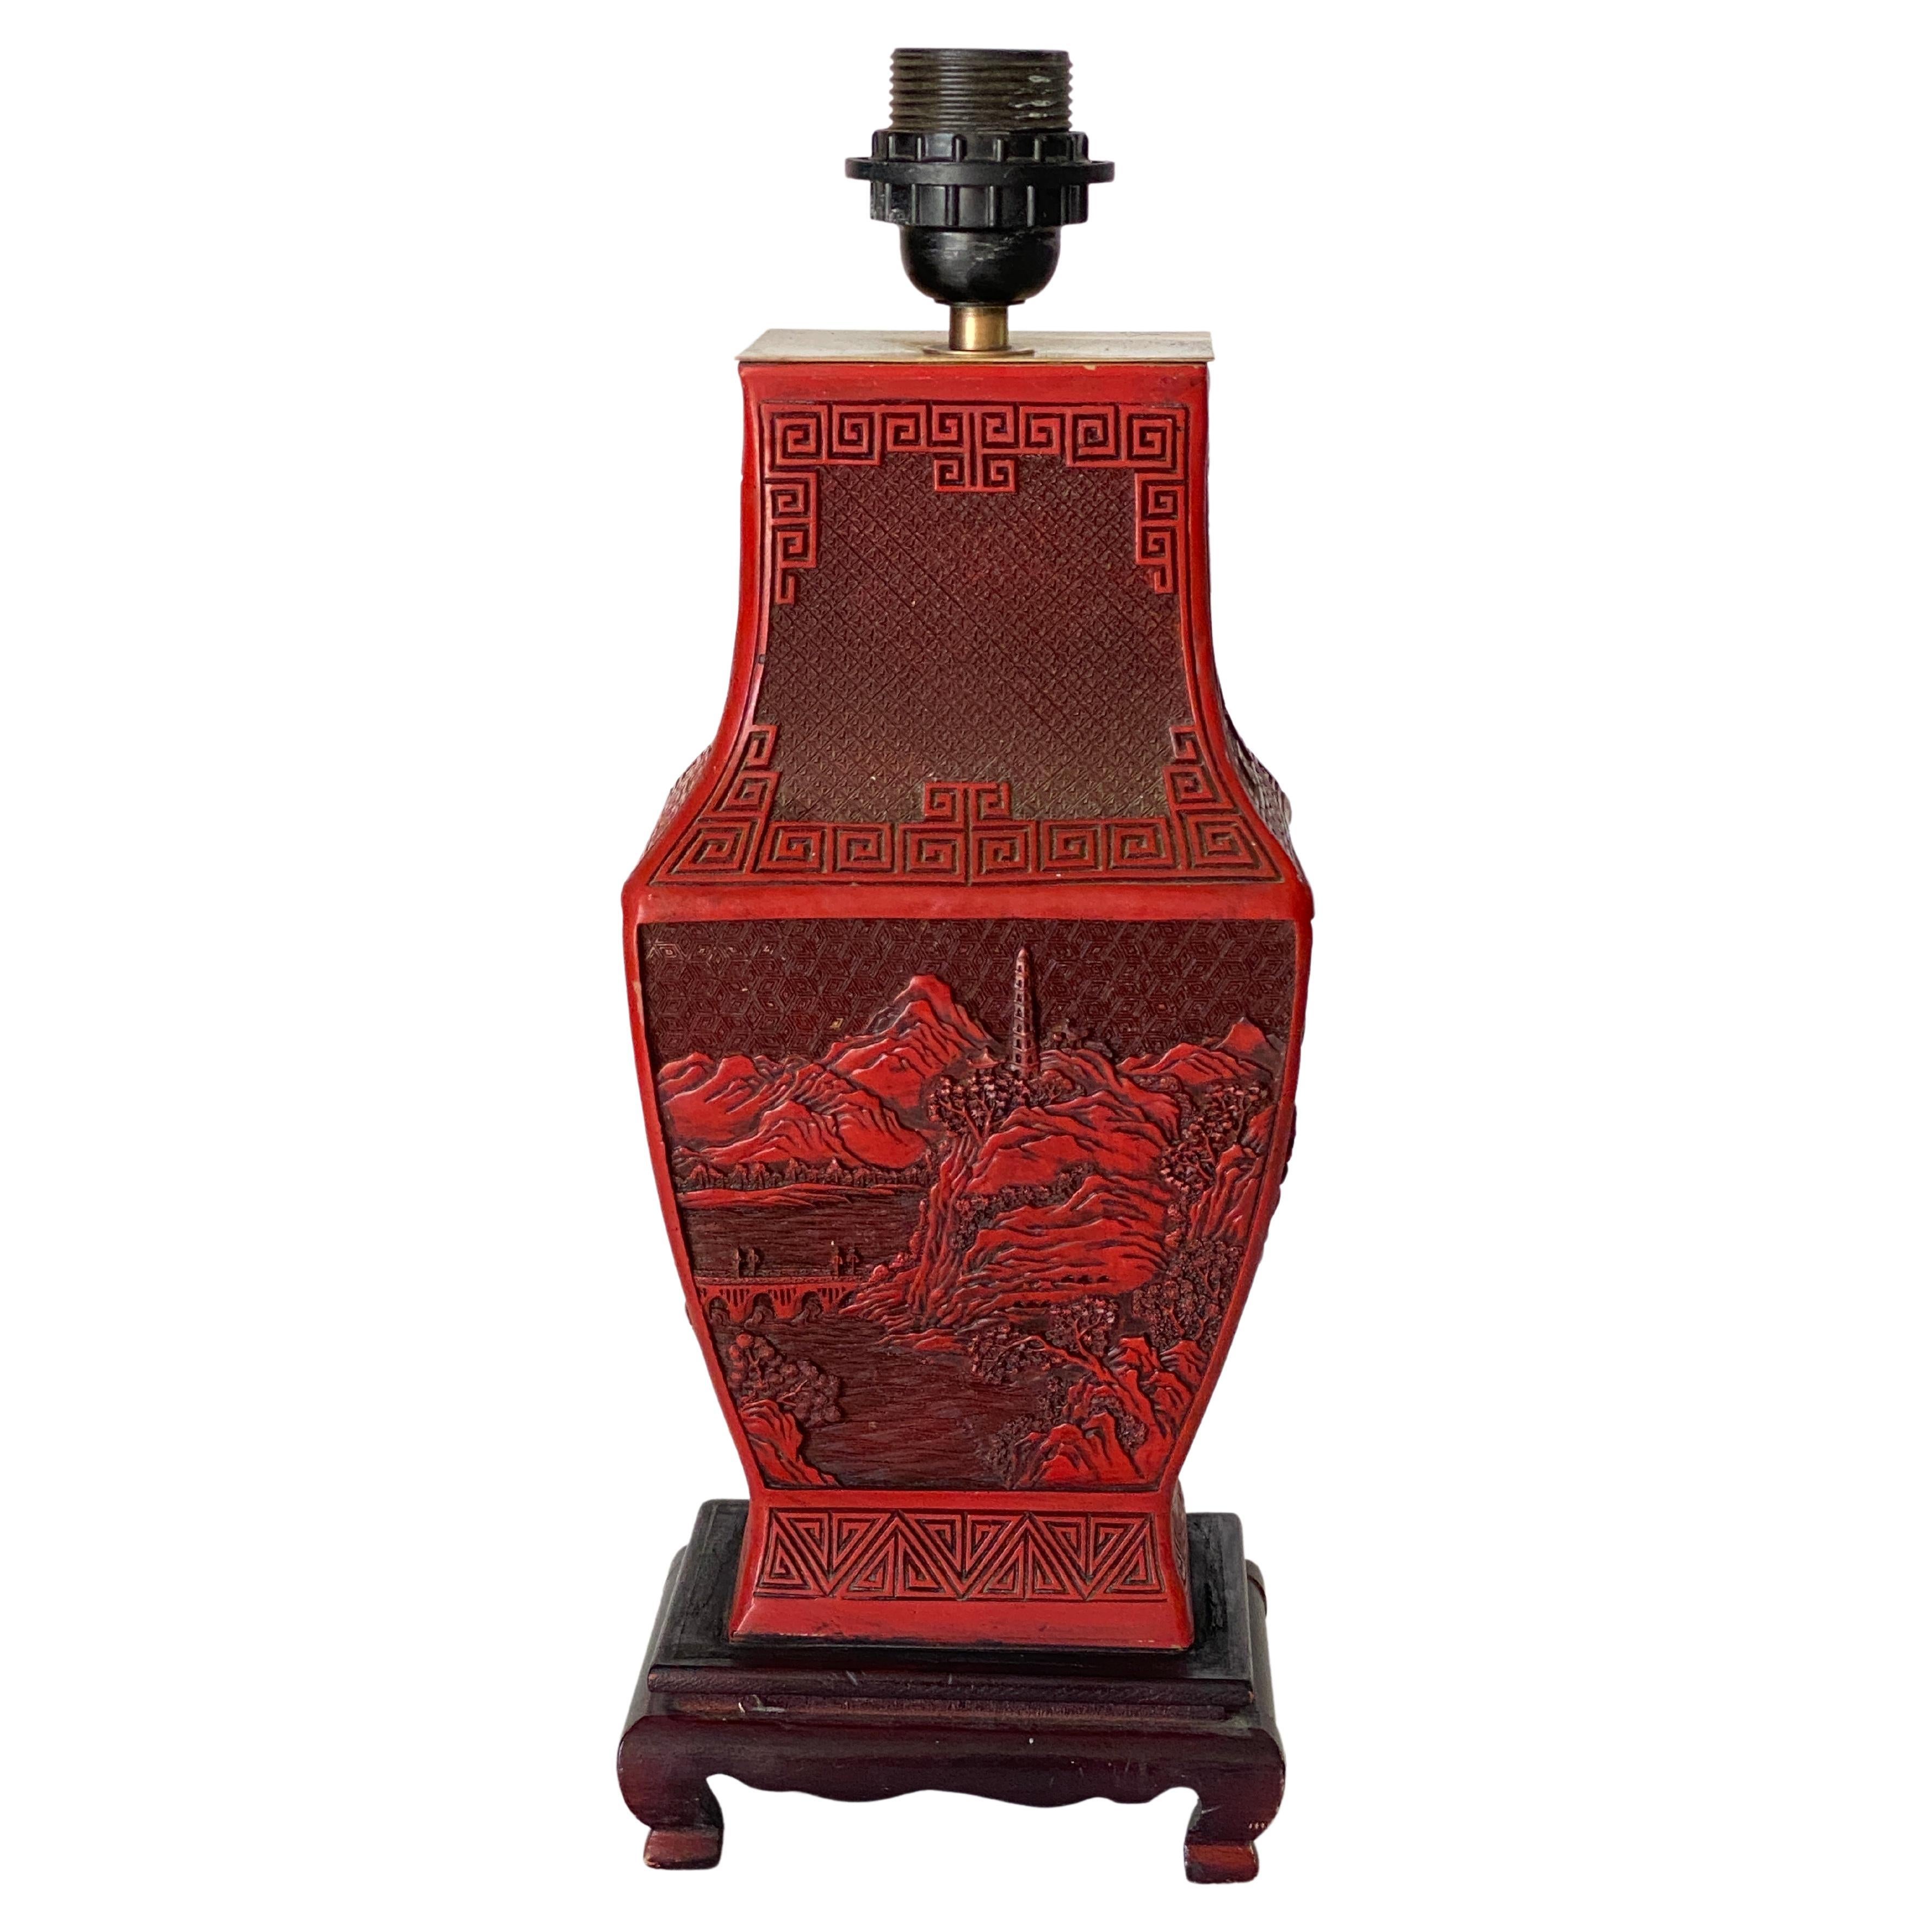 This is a stunning Chinese cinnabar vase is intricately carved with Chinese figures and natural elements, situated on a wood base. 19th century.
The size of the vase only is 11,81 inches.


US PLUG ADAPTATOR WILL BE FURNISHED FOR FREE TO THE US